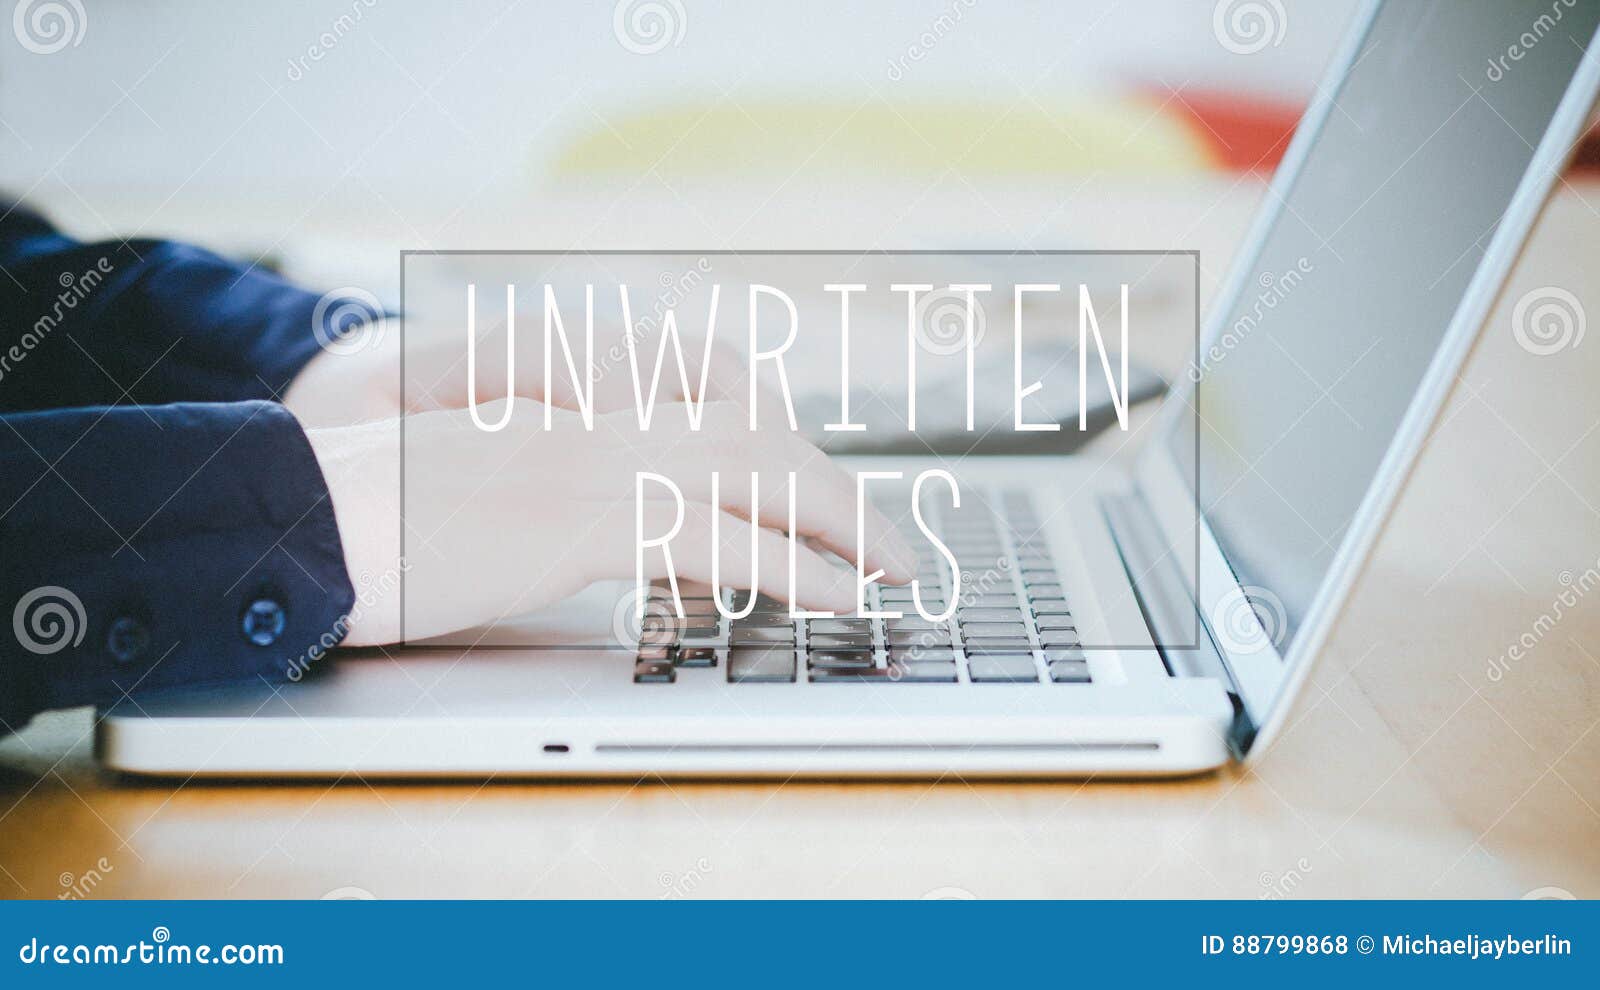 unwritten rules, text over young man typing on laptop at desk